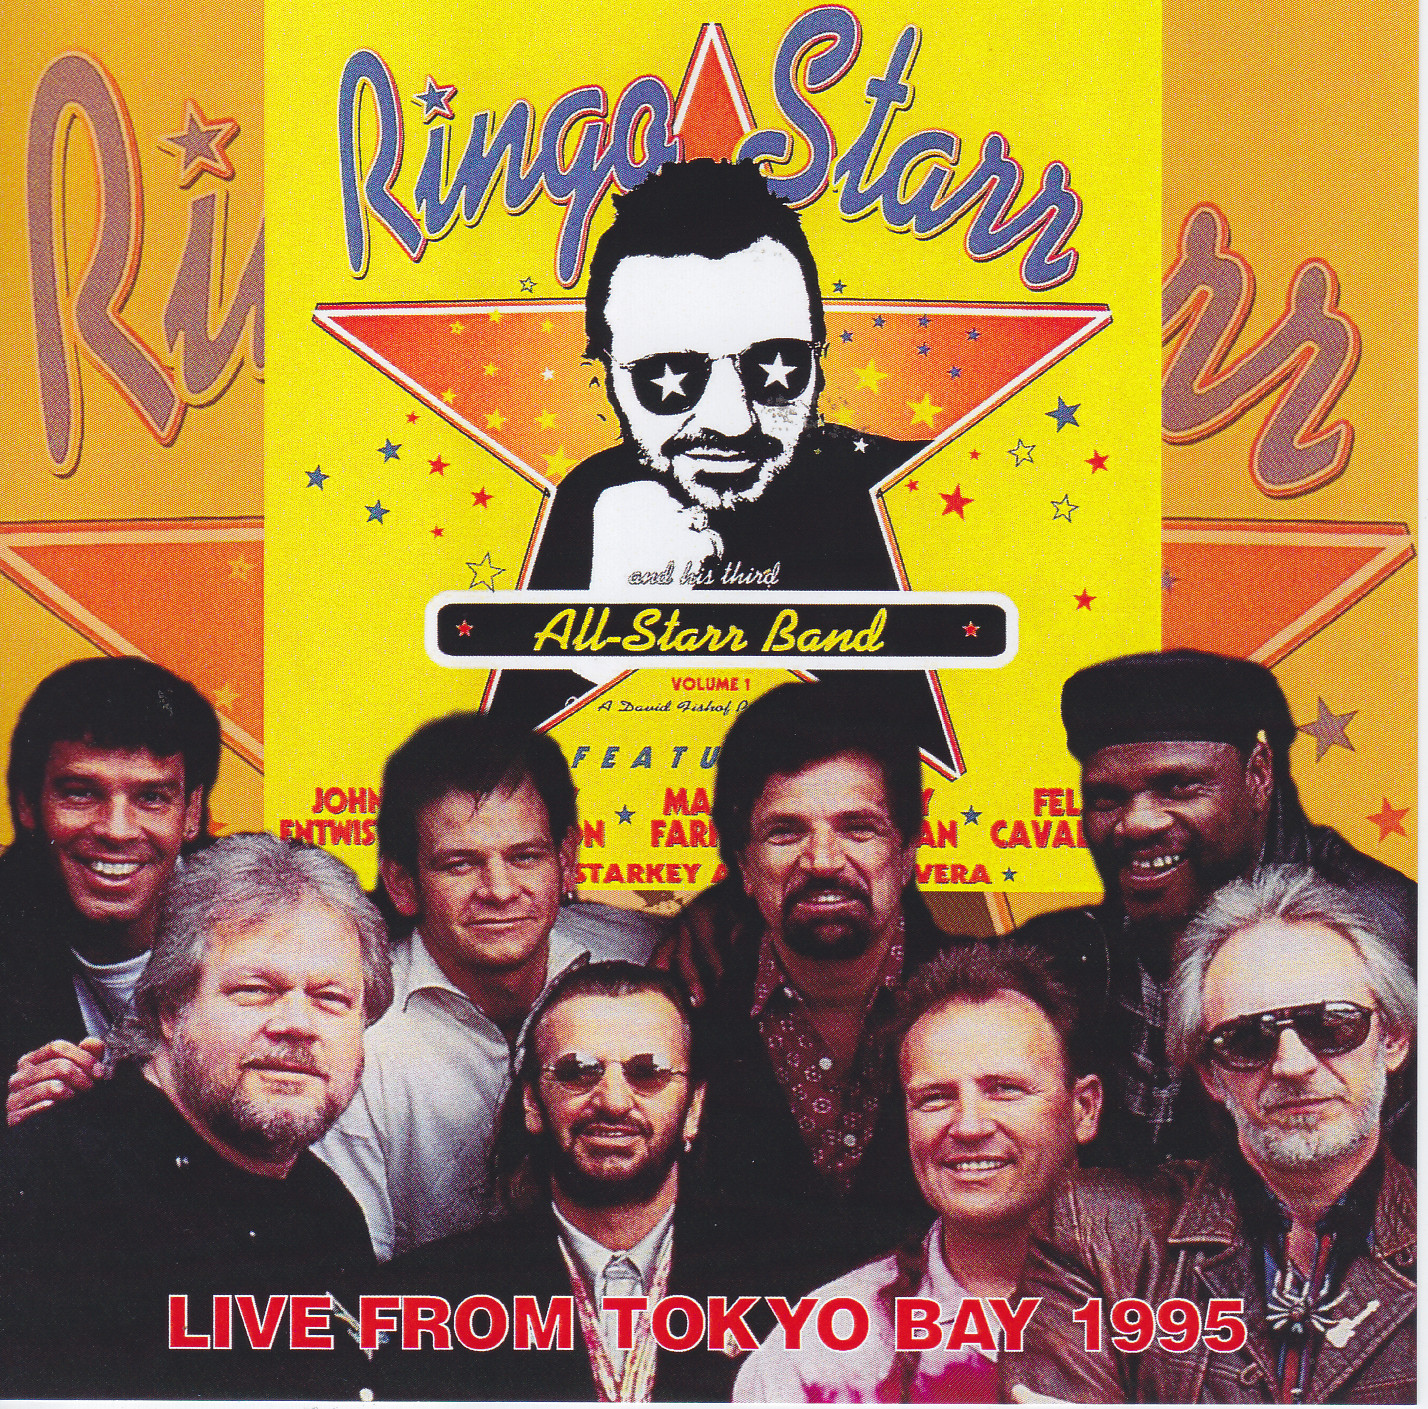 Ringo Starr & His All Starr Band / Live From Tokyo Bay 1995 / 2CDR 